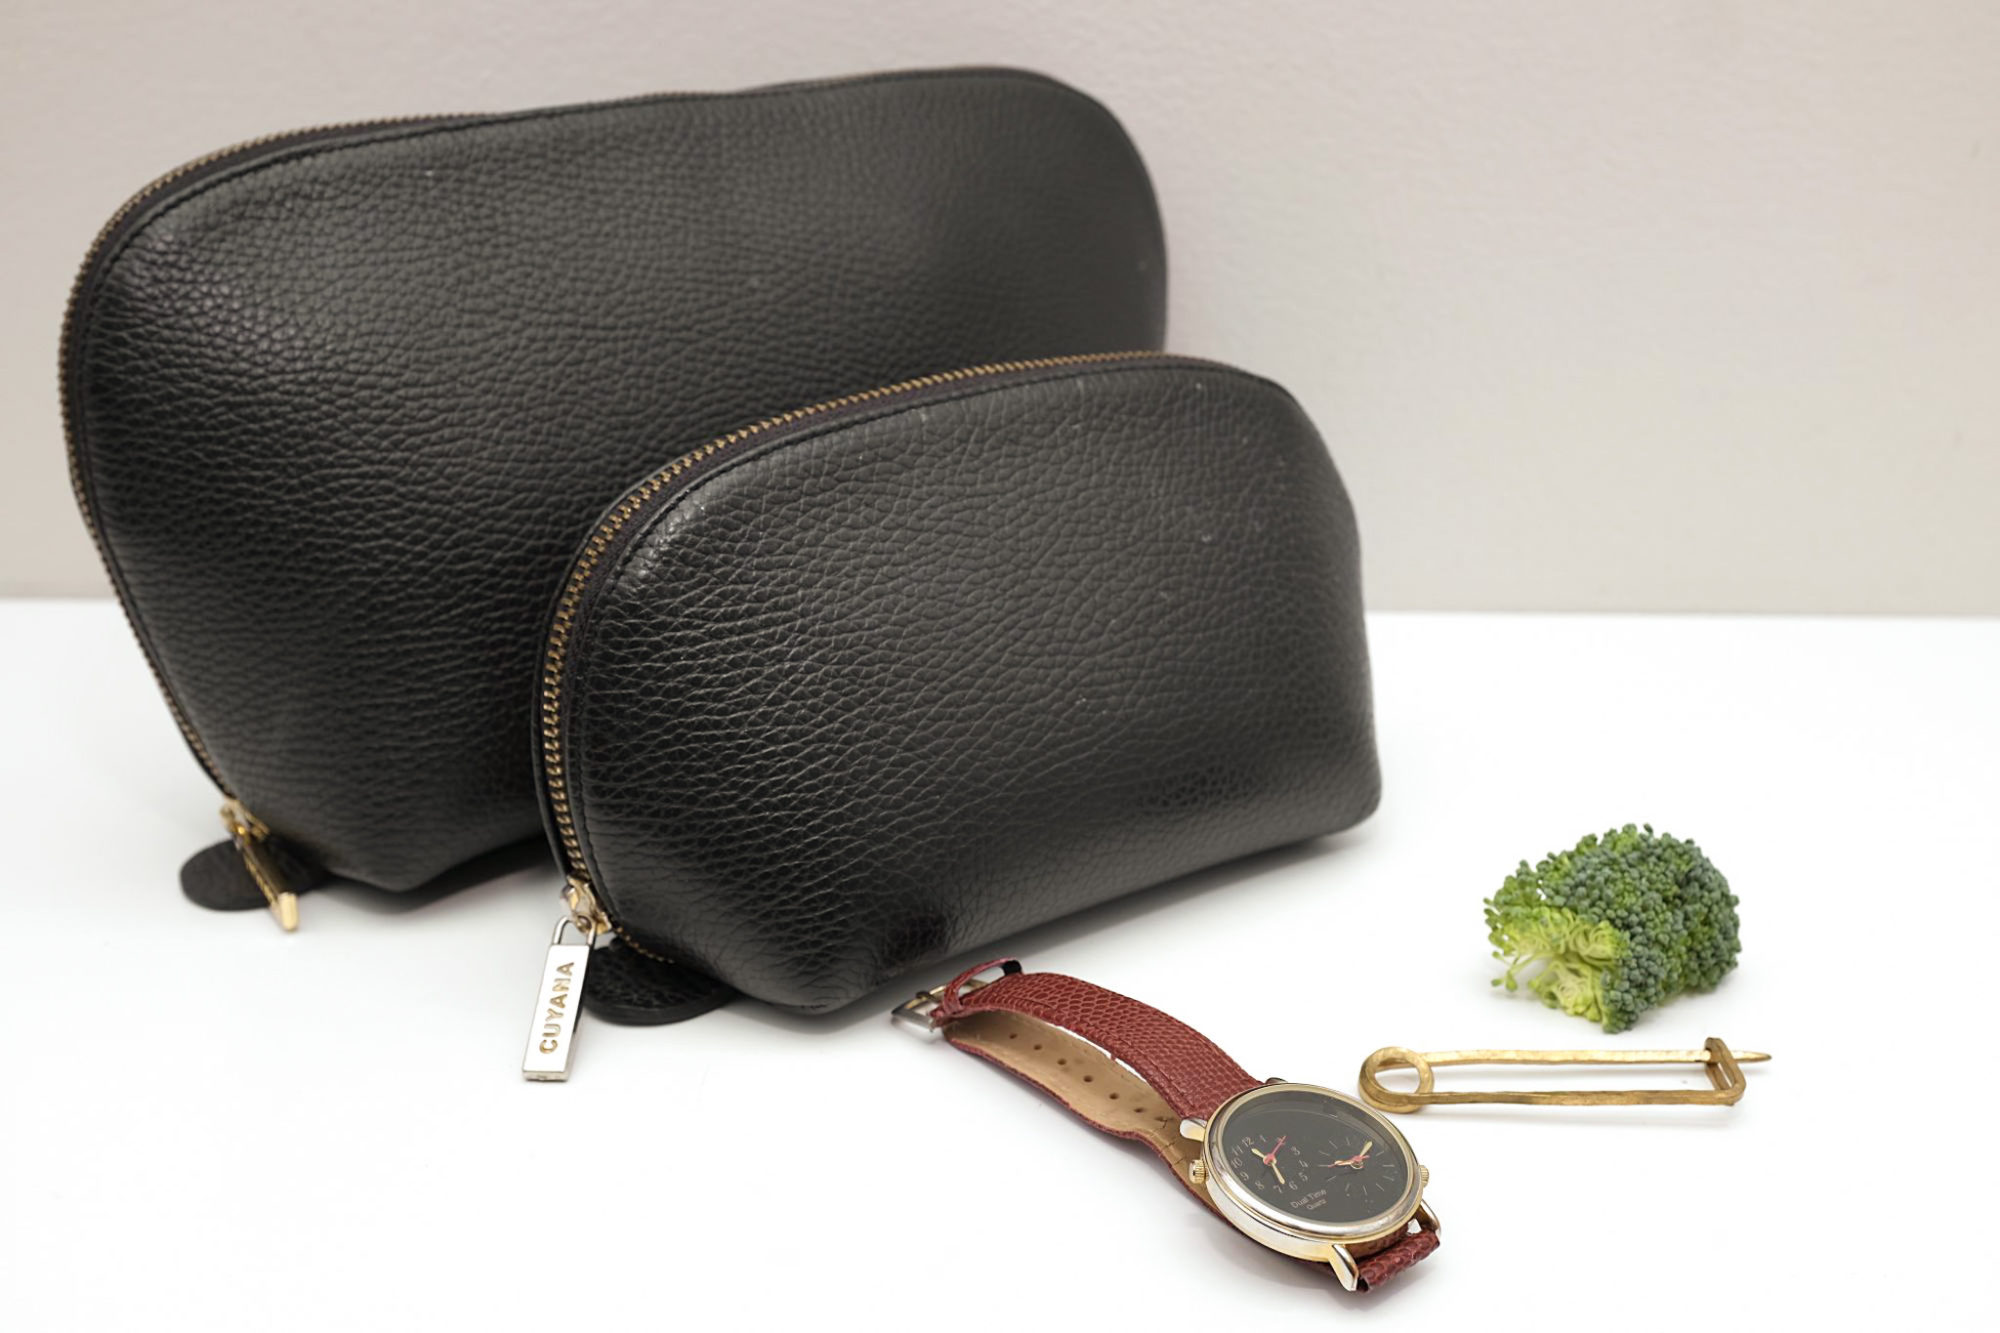 The leather travel set sits on a white bench with a watch, safety pin, and a piece of broccoli (this last item is an homage to an image in the previous post that included an air plant - that plant is very long dead)